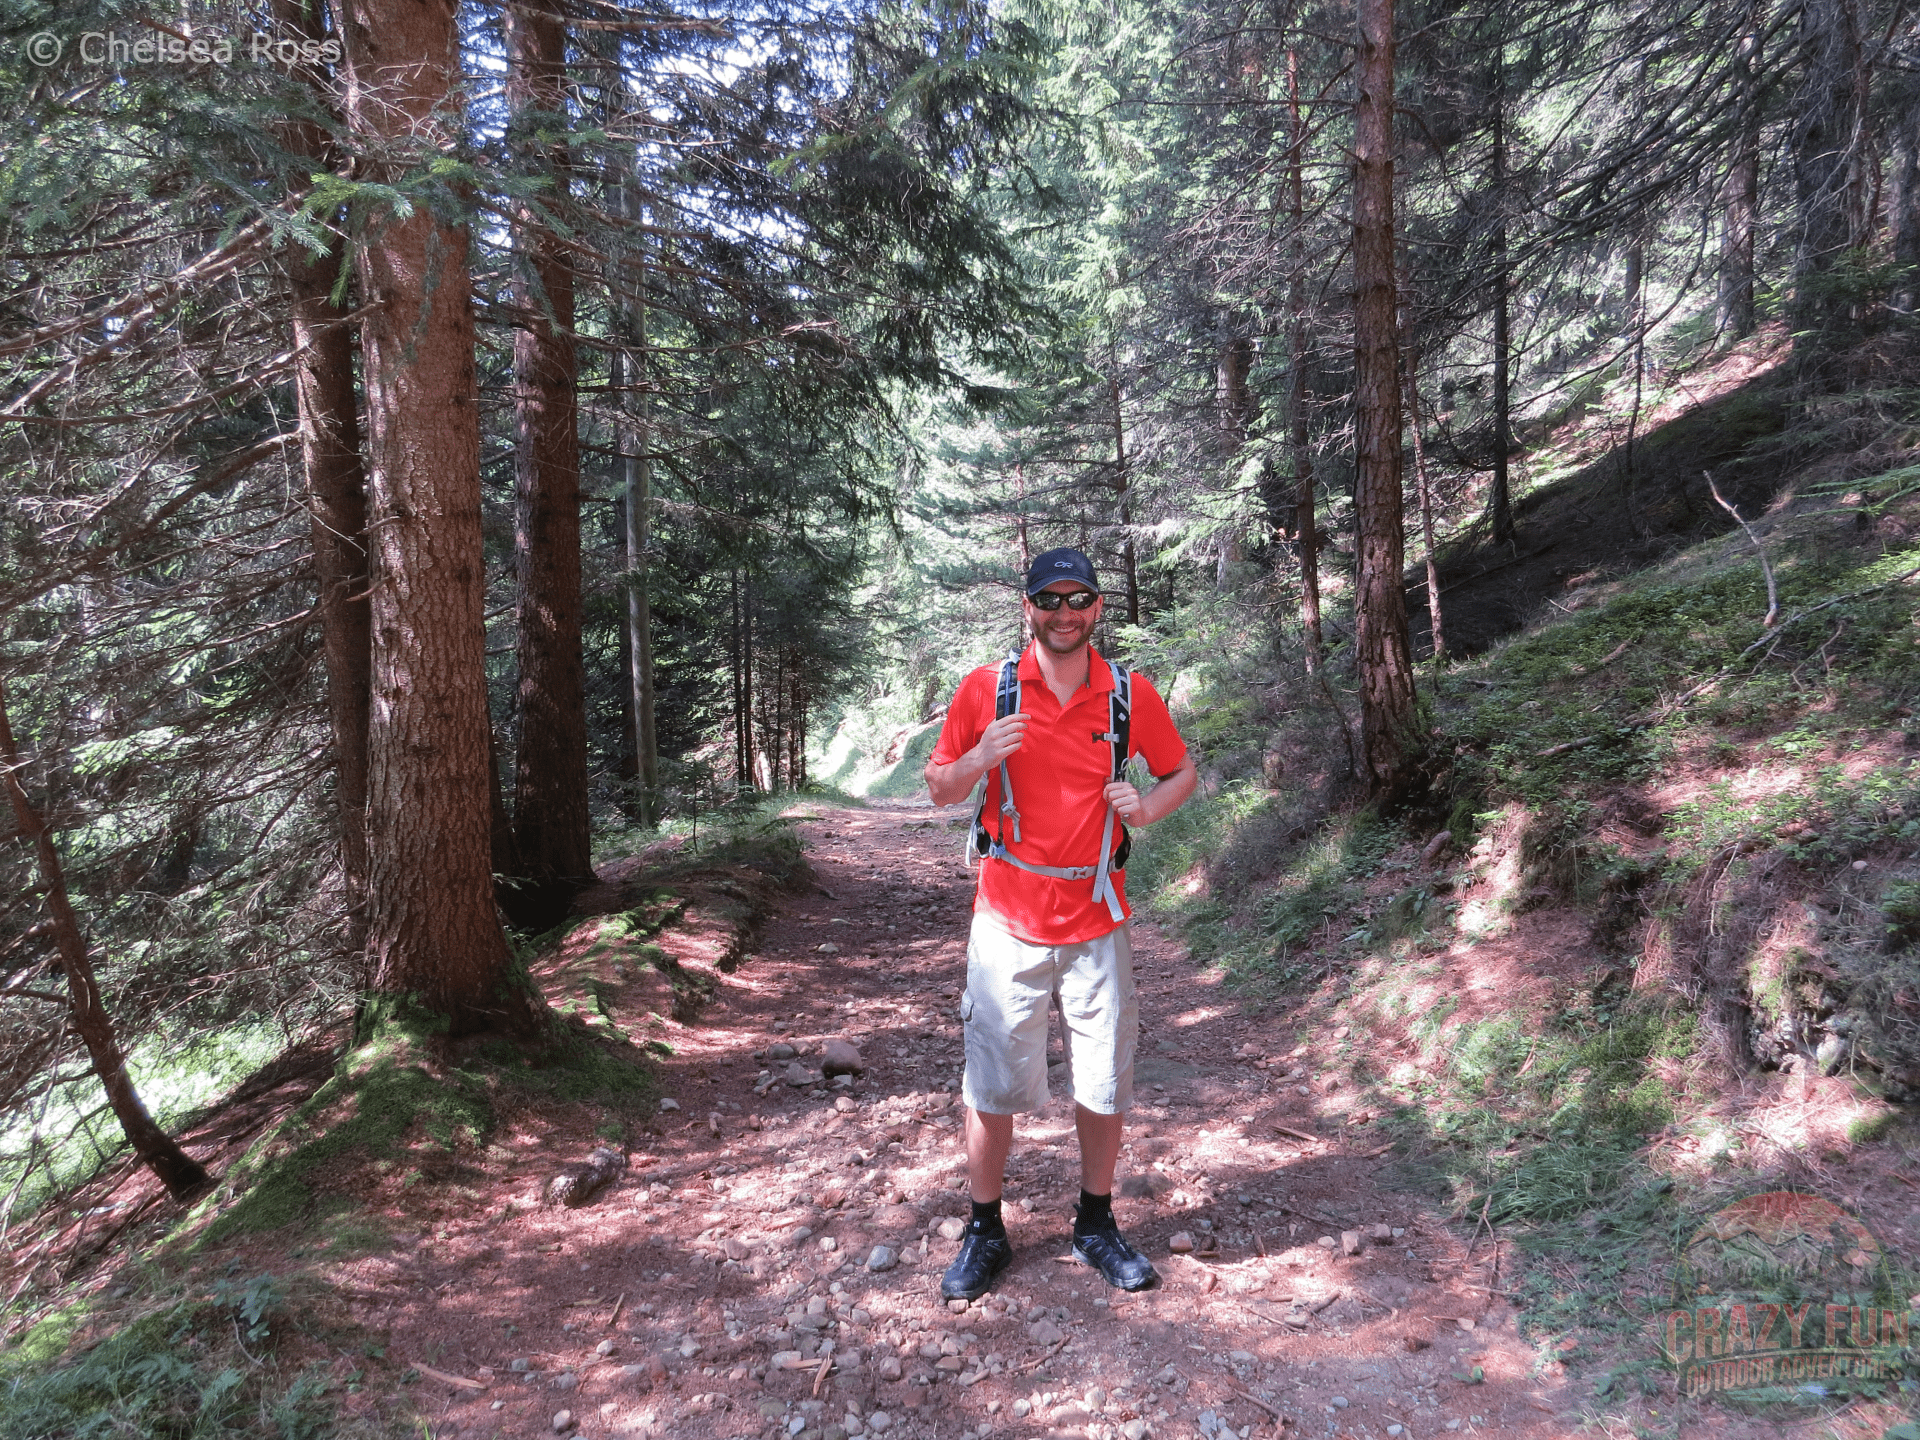 Kris standing in the middle of the trail on our unforgettable hiking holiday in Bolzano. There are trees surrounding him on both sides.